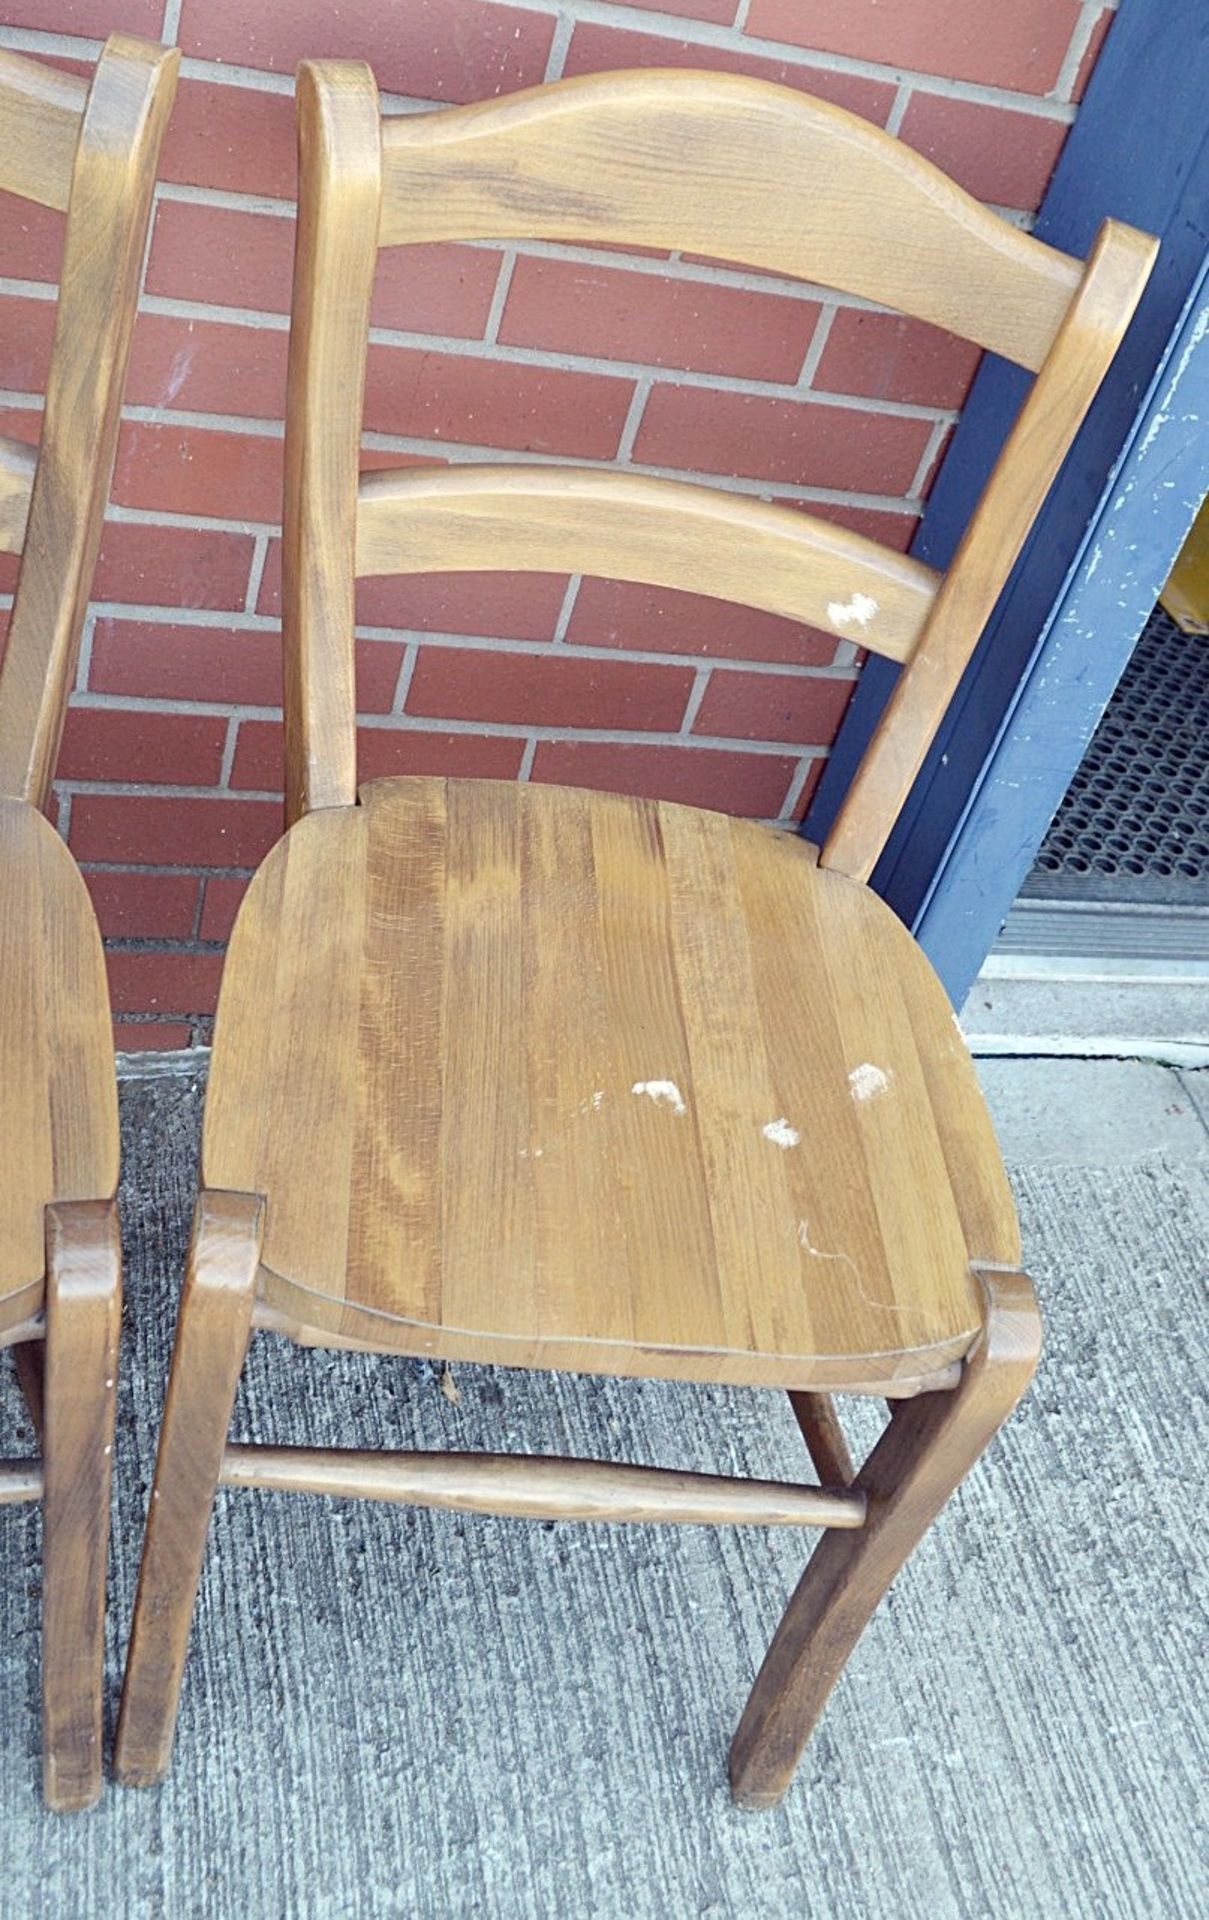 3 x Matching Sturdy Solid Wood Chairs With An Attractive Varnished Finish - Dimensions: H90 x W47 - Image 3 of 6